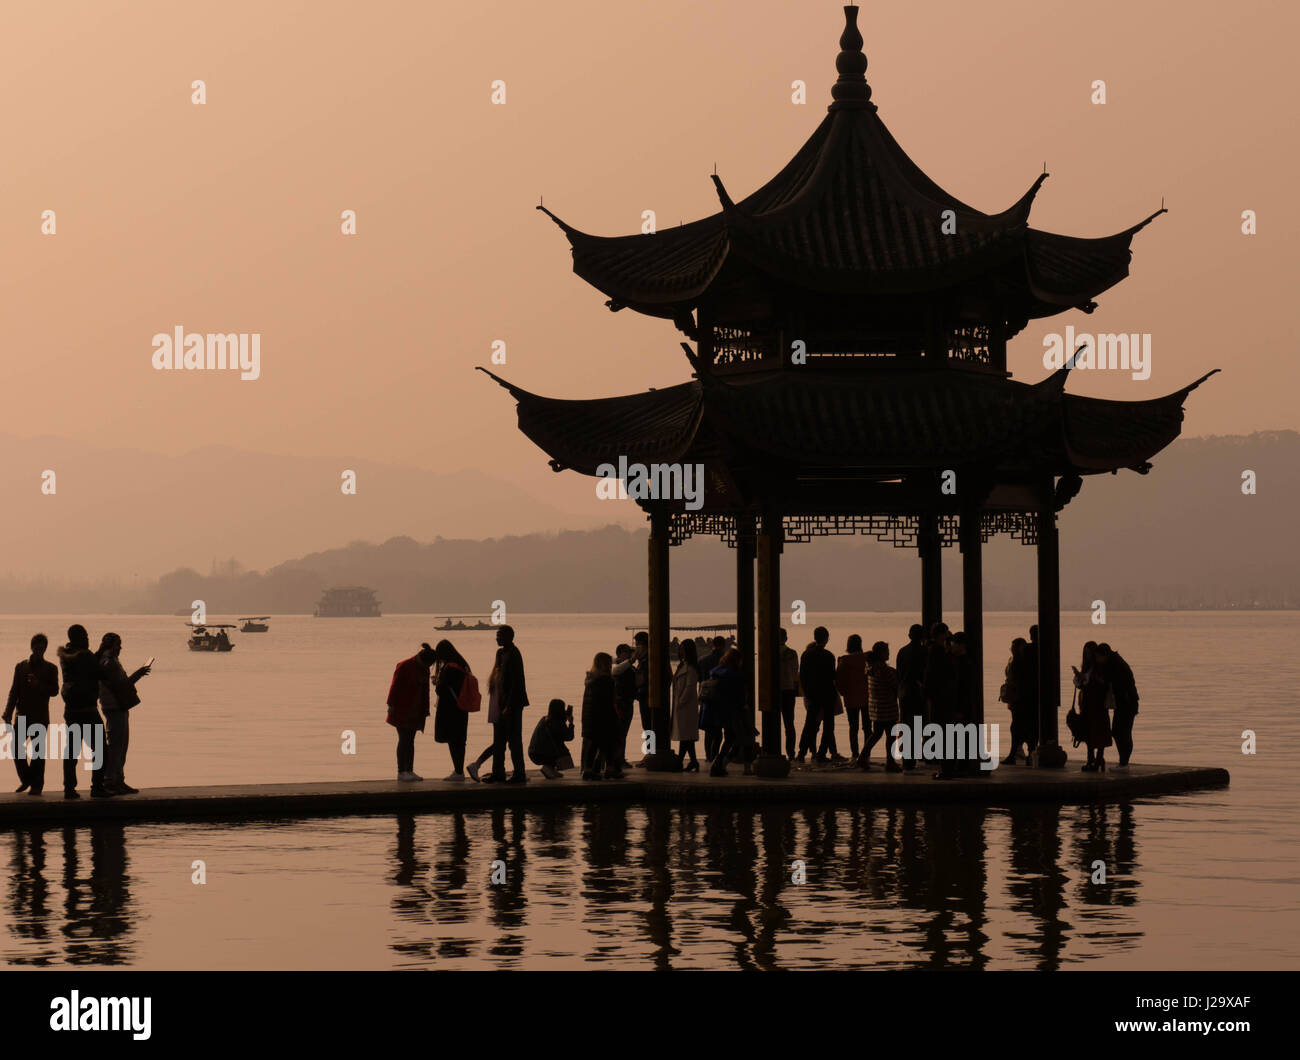 Visitors standing in silhouette on West Lake pagoda in Hangzhou, China Stock Photo